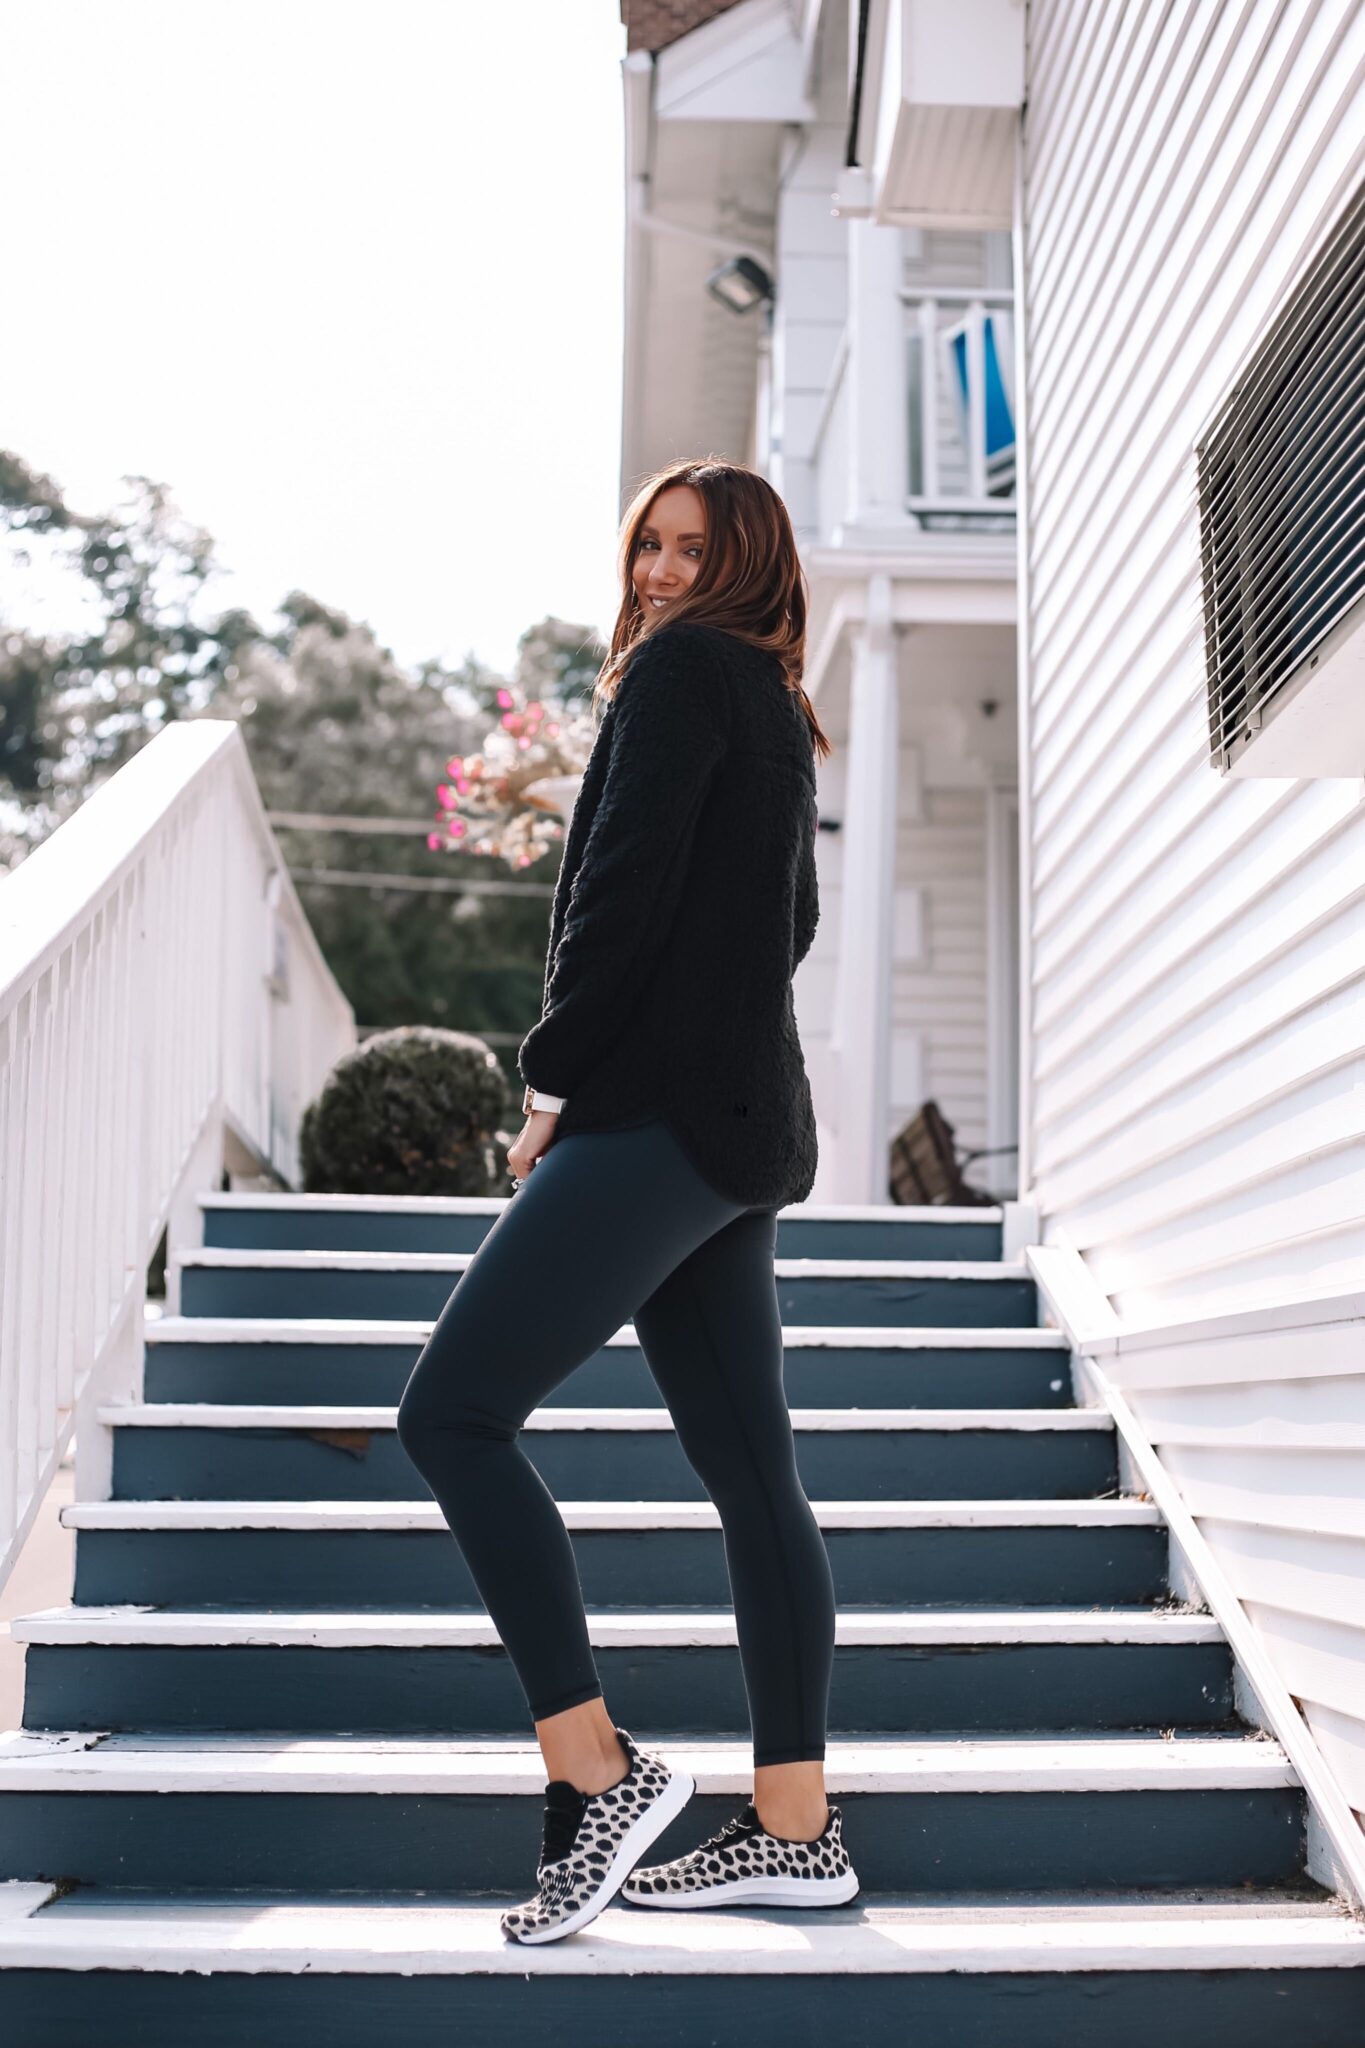 walmart black fleece with leggings and sneakers, fall outfit idea